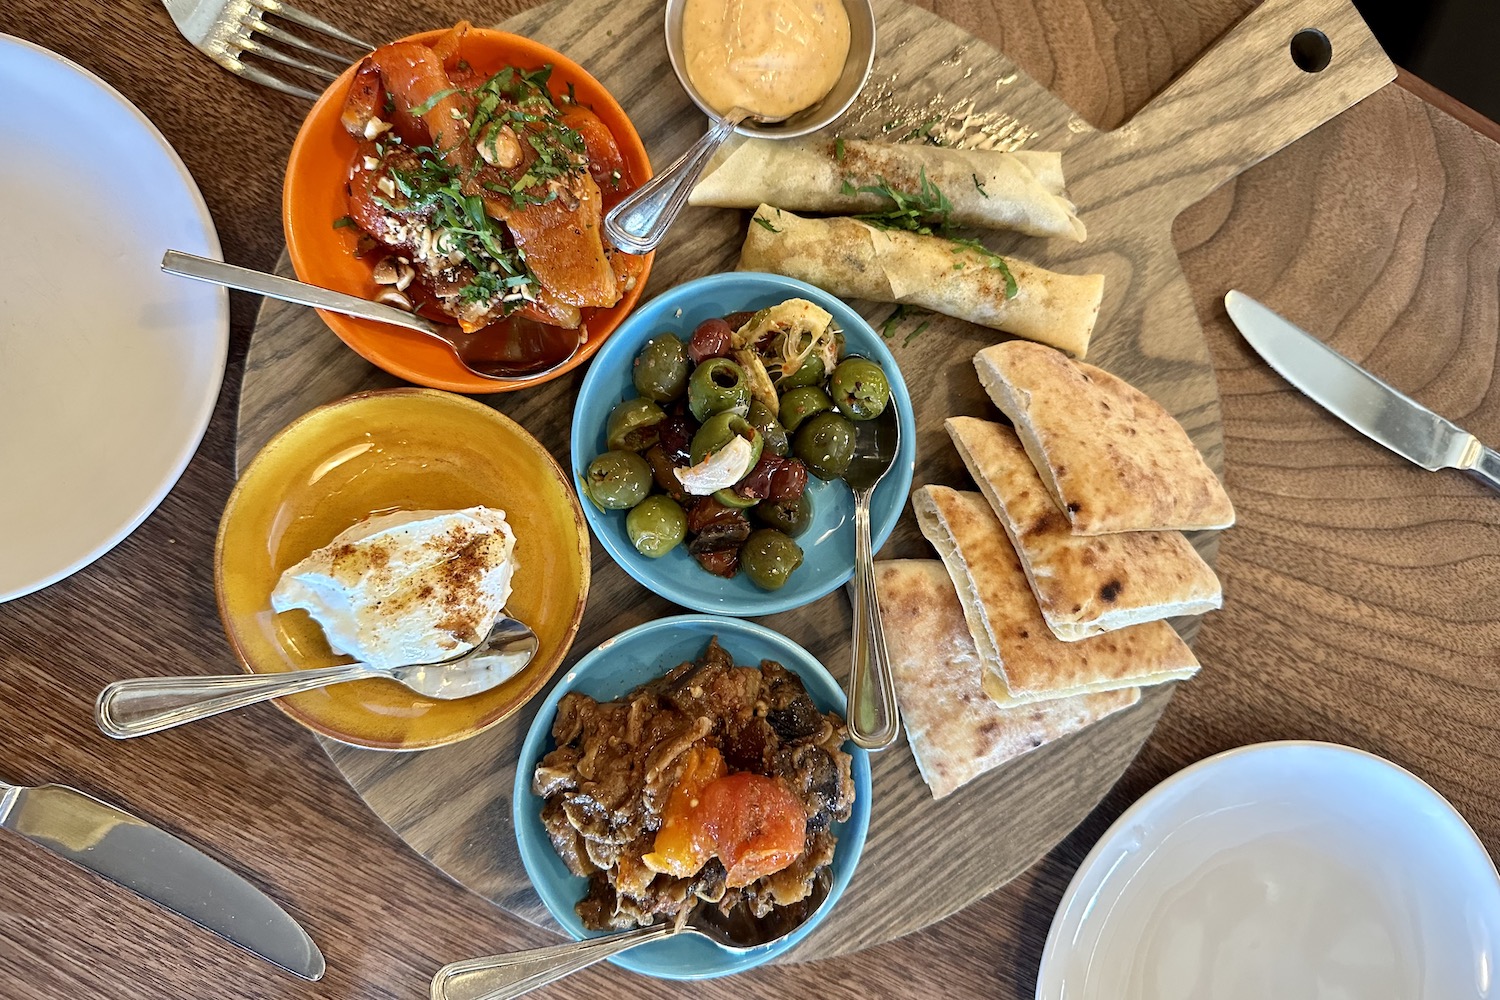 mezze platter with olives, labneh, eggplant, moroccan cigars and pita